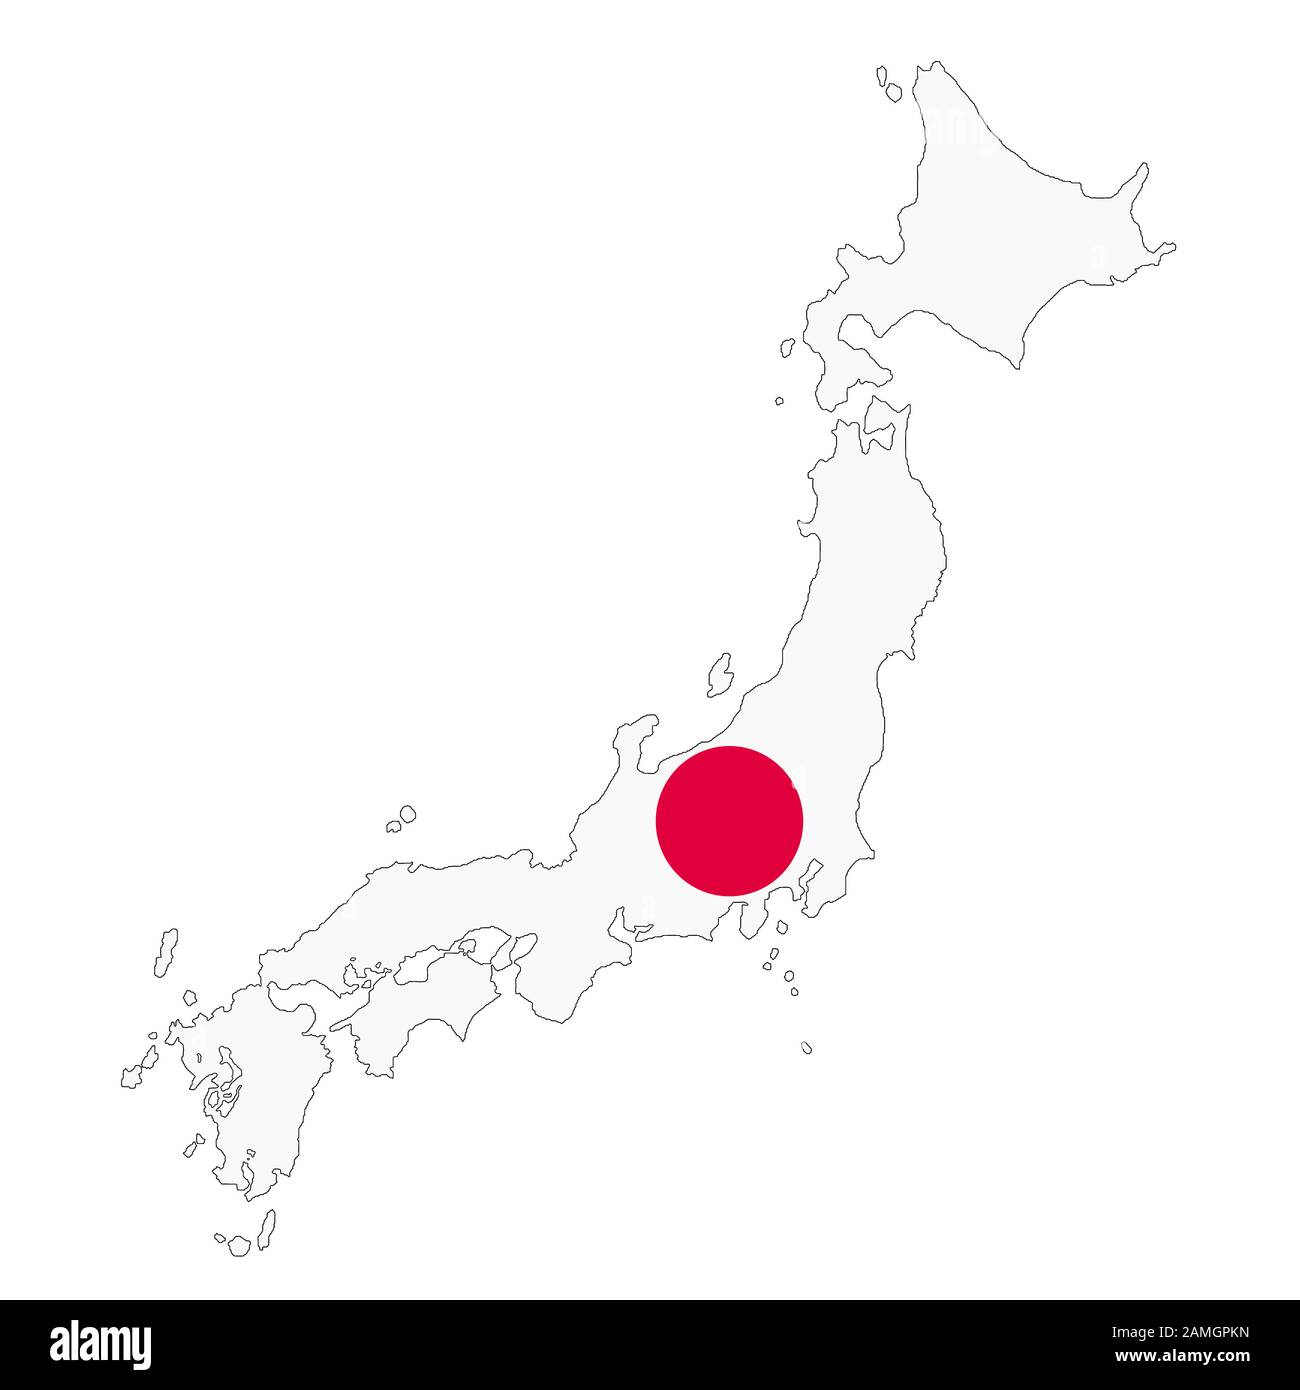 A Japan map on white background with clipping path Stock Photo